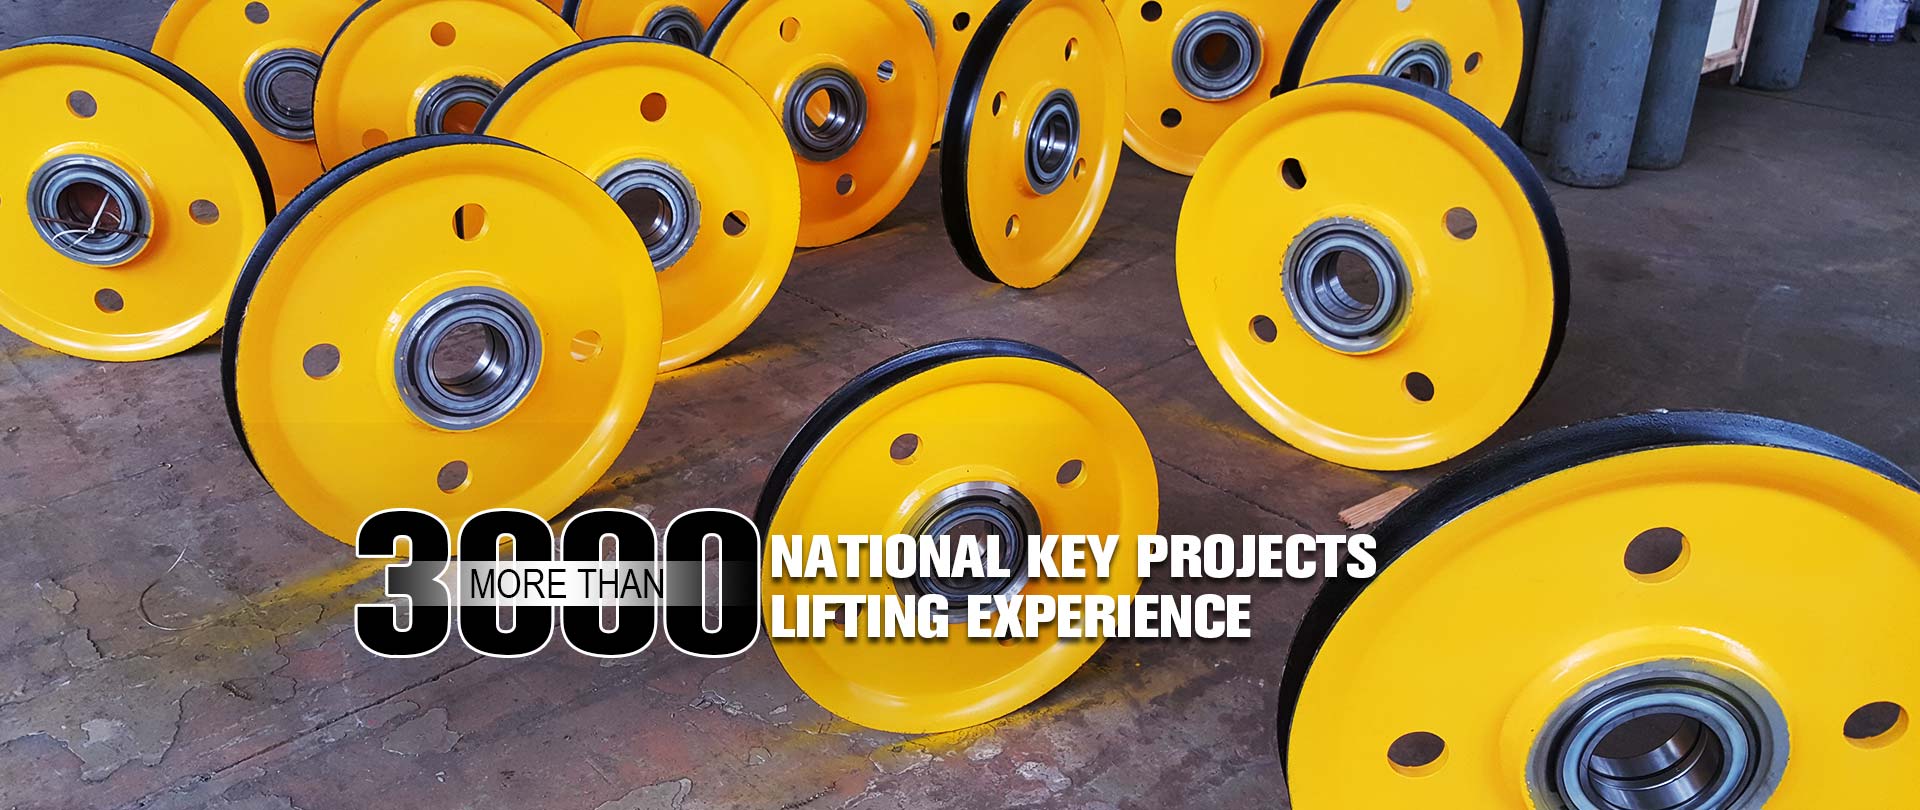 3000 More Than National Key Projects Lifting Experience